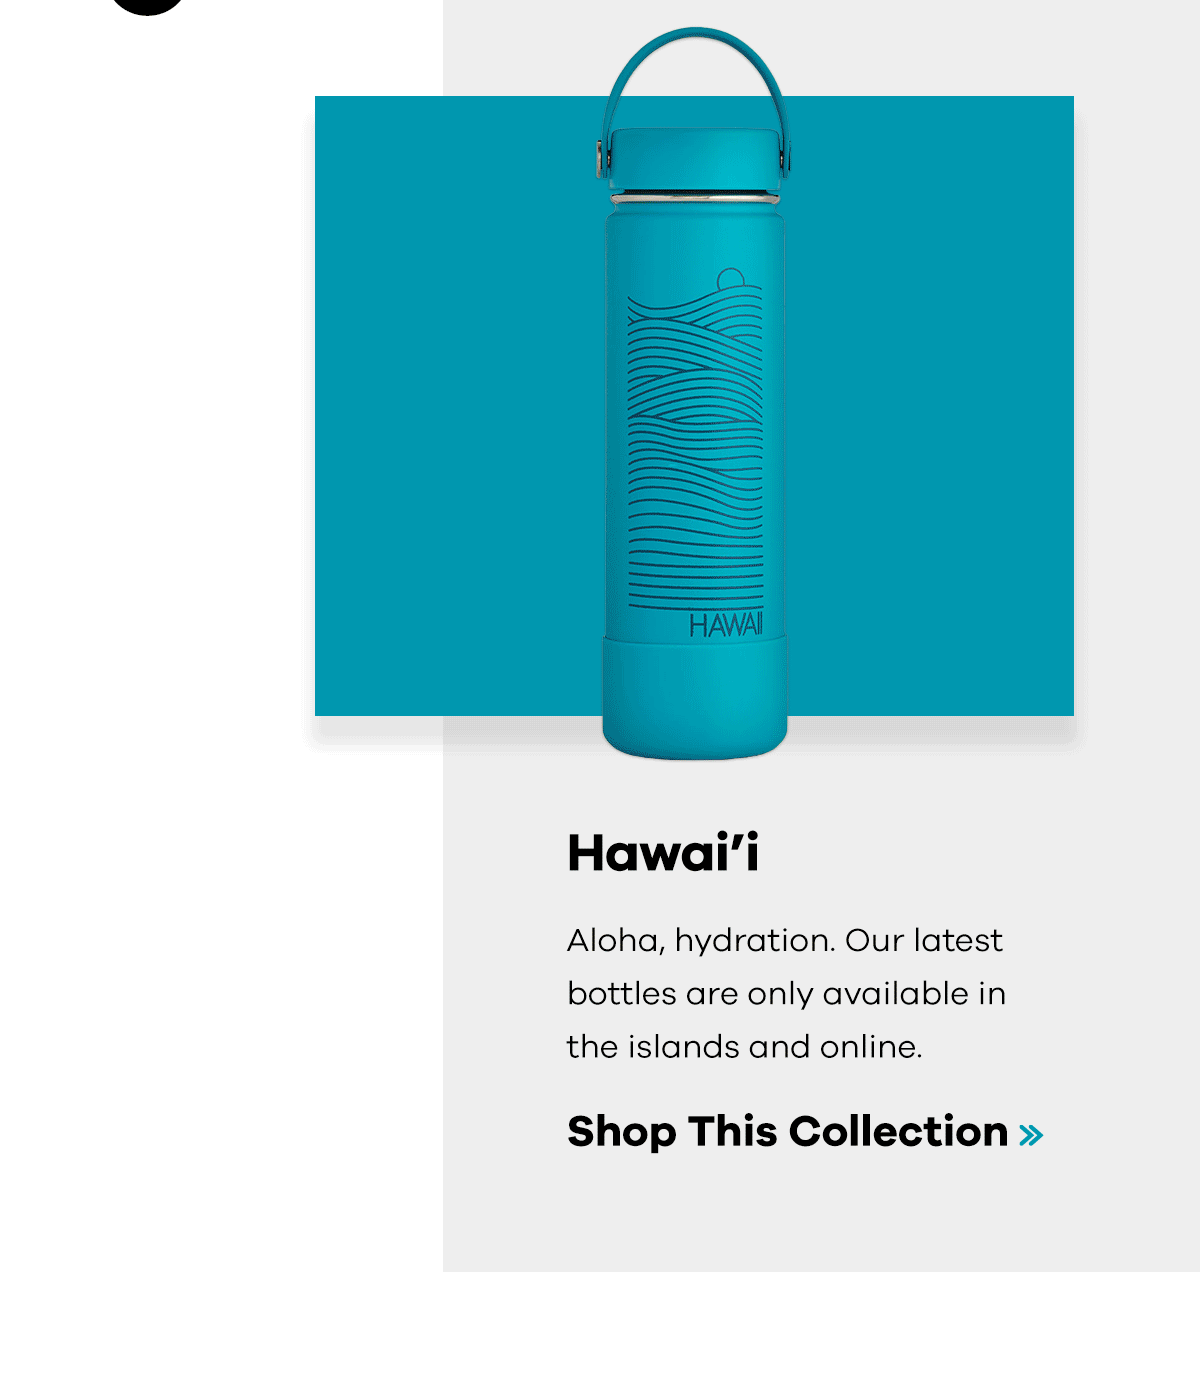 Hawai''i - Alohoa, hydration. Our latest bottles are only available in the islands and online. | Shop This Colletion >>